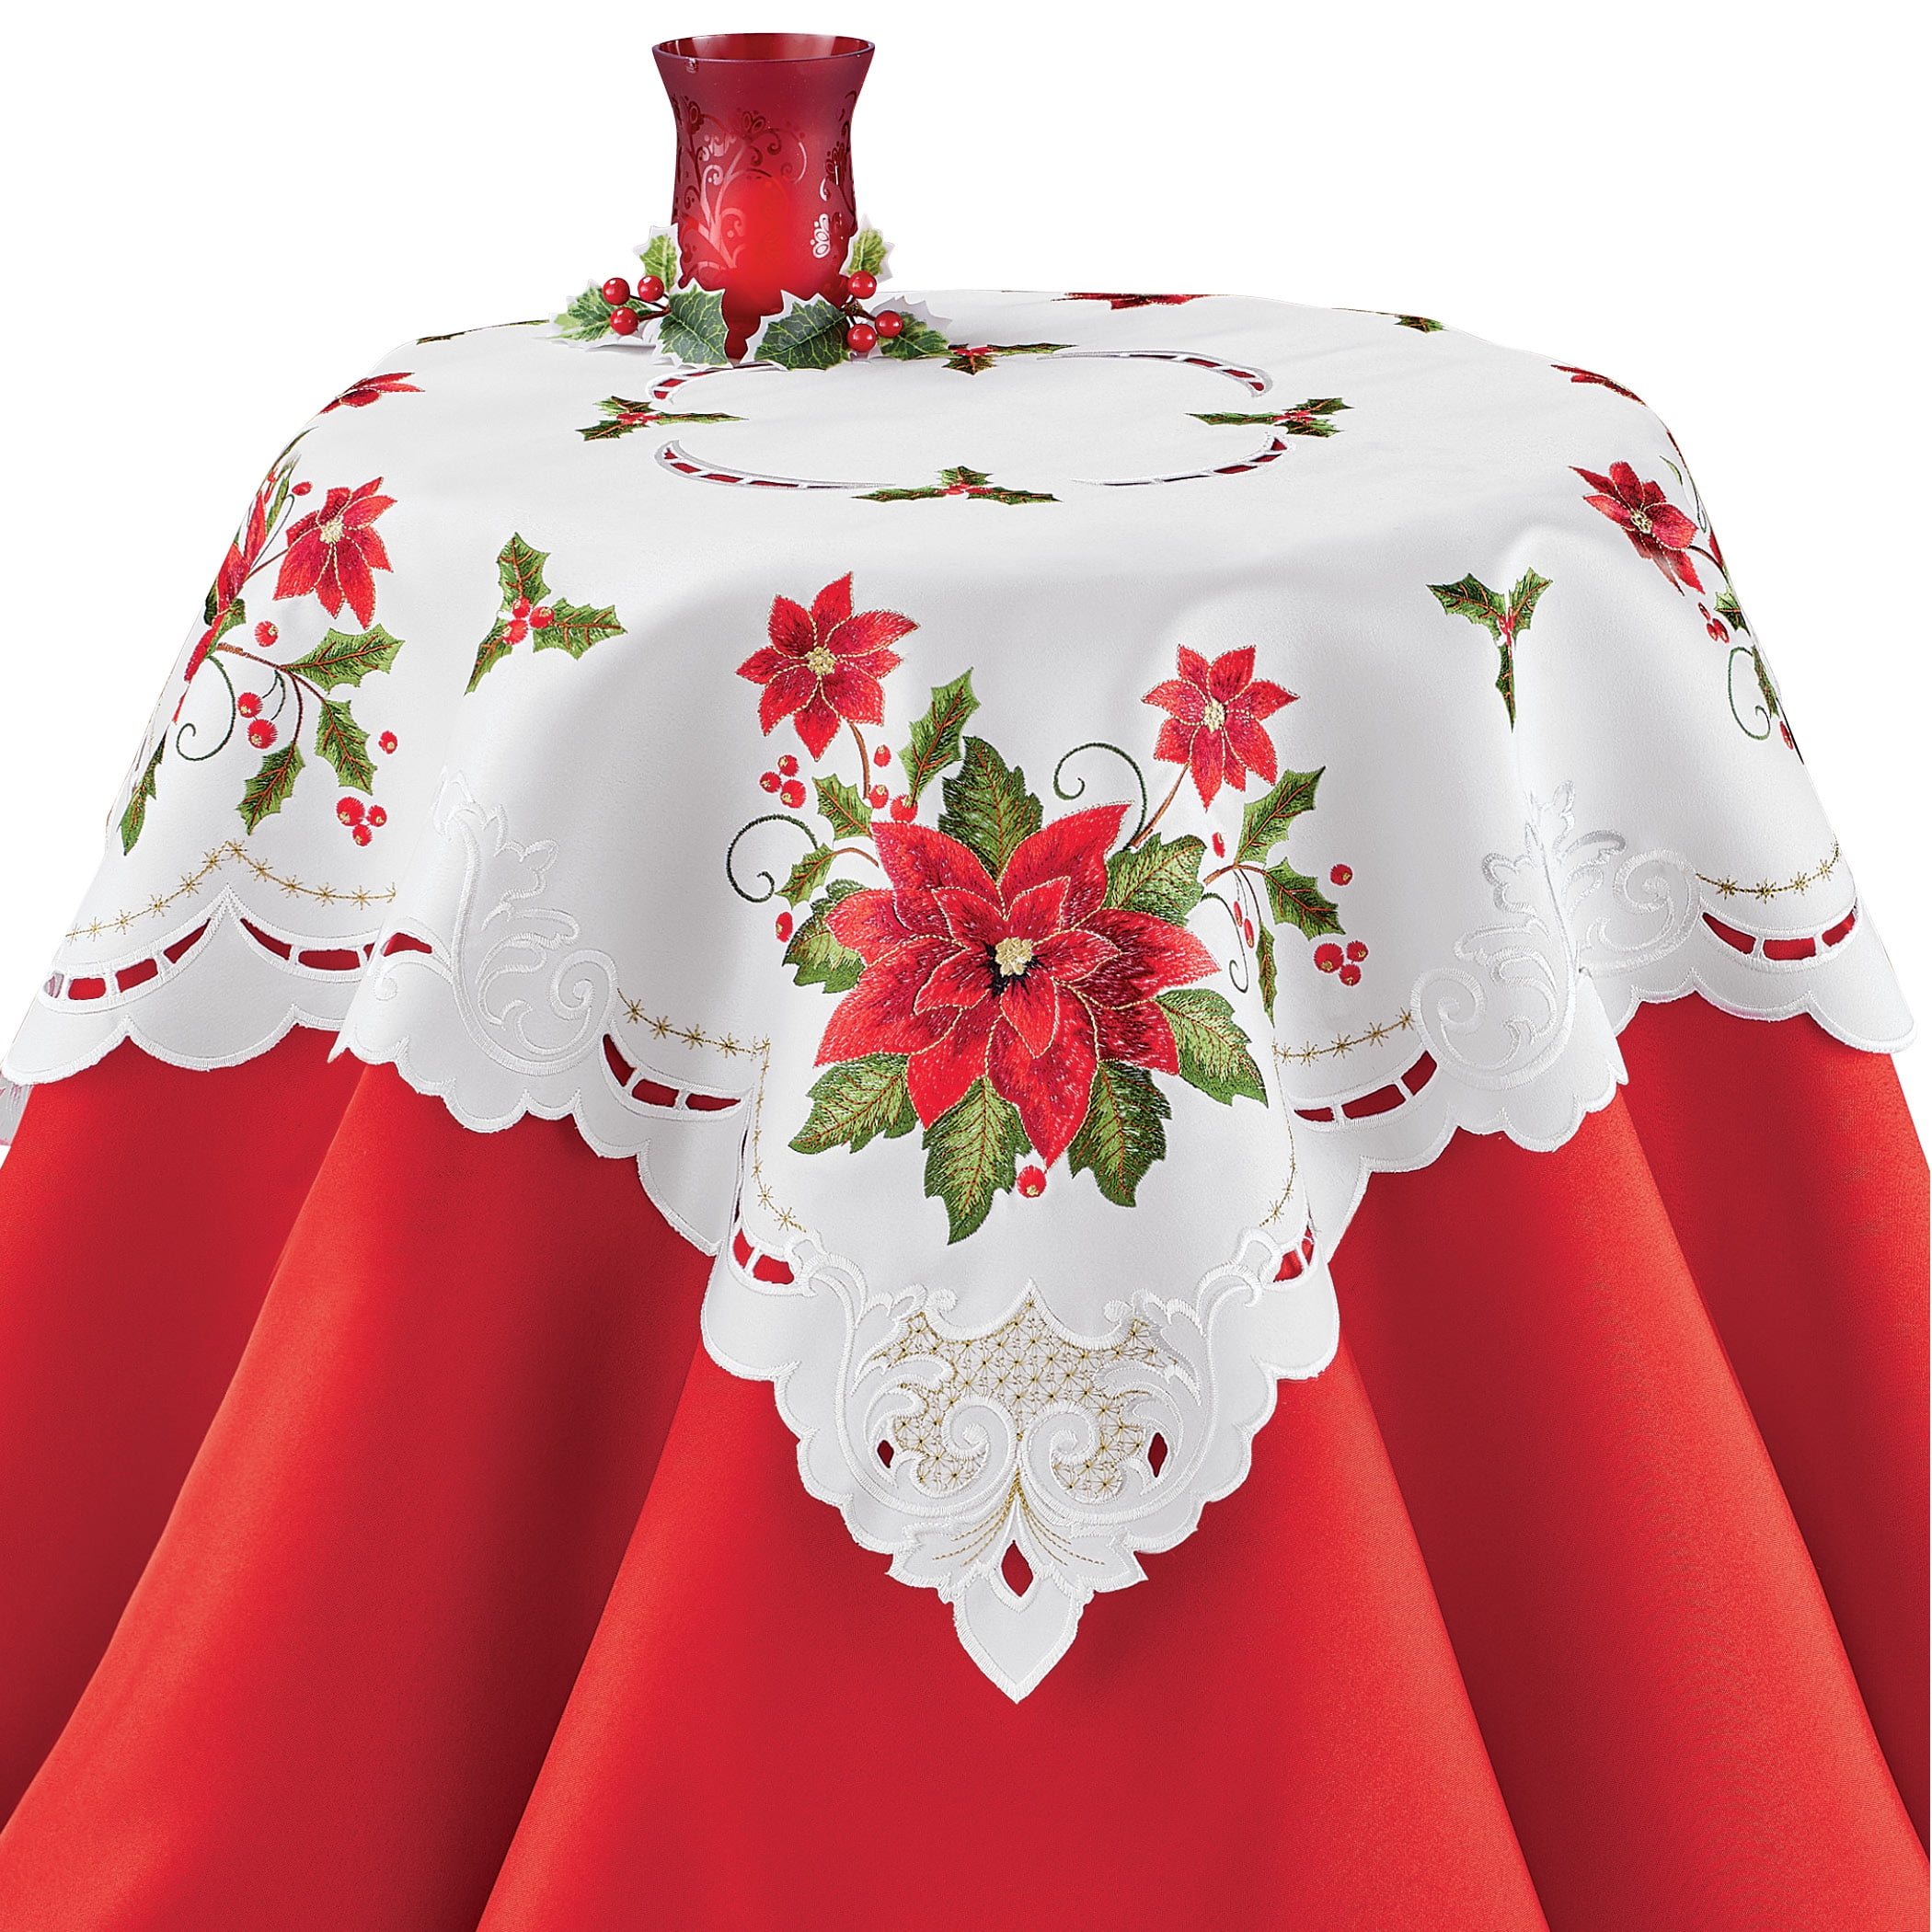 Christmas Poinsettia Holiday Tablecloth Bright Colorful Fowers Digital Printed 